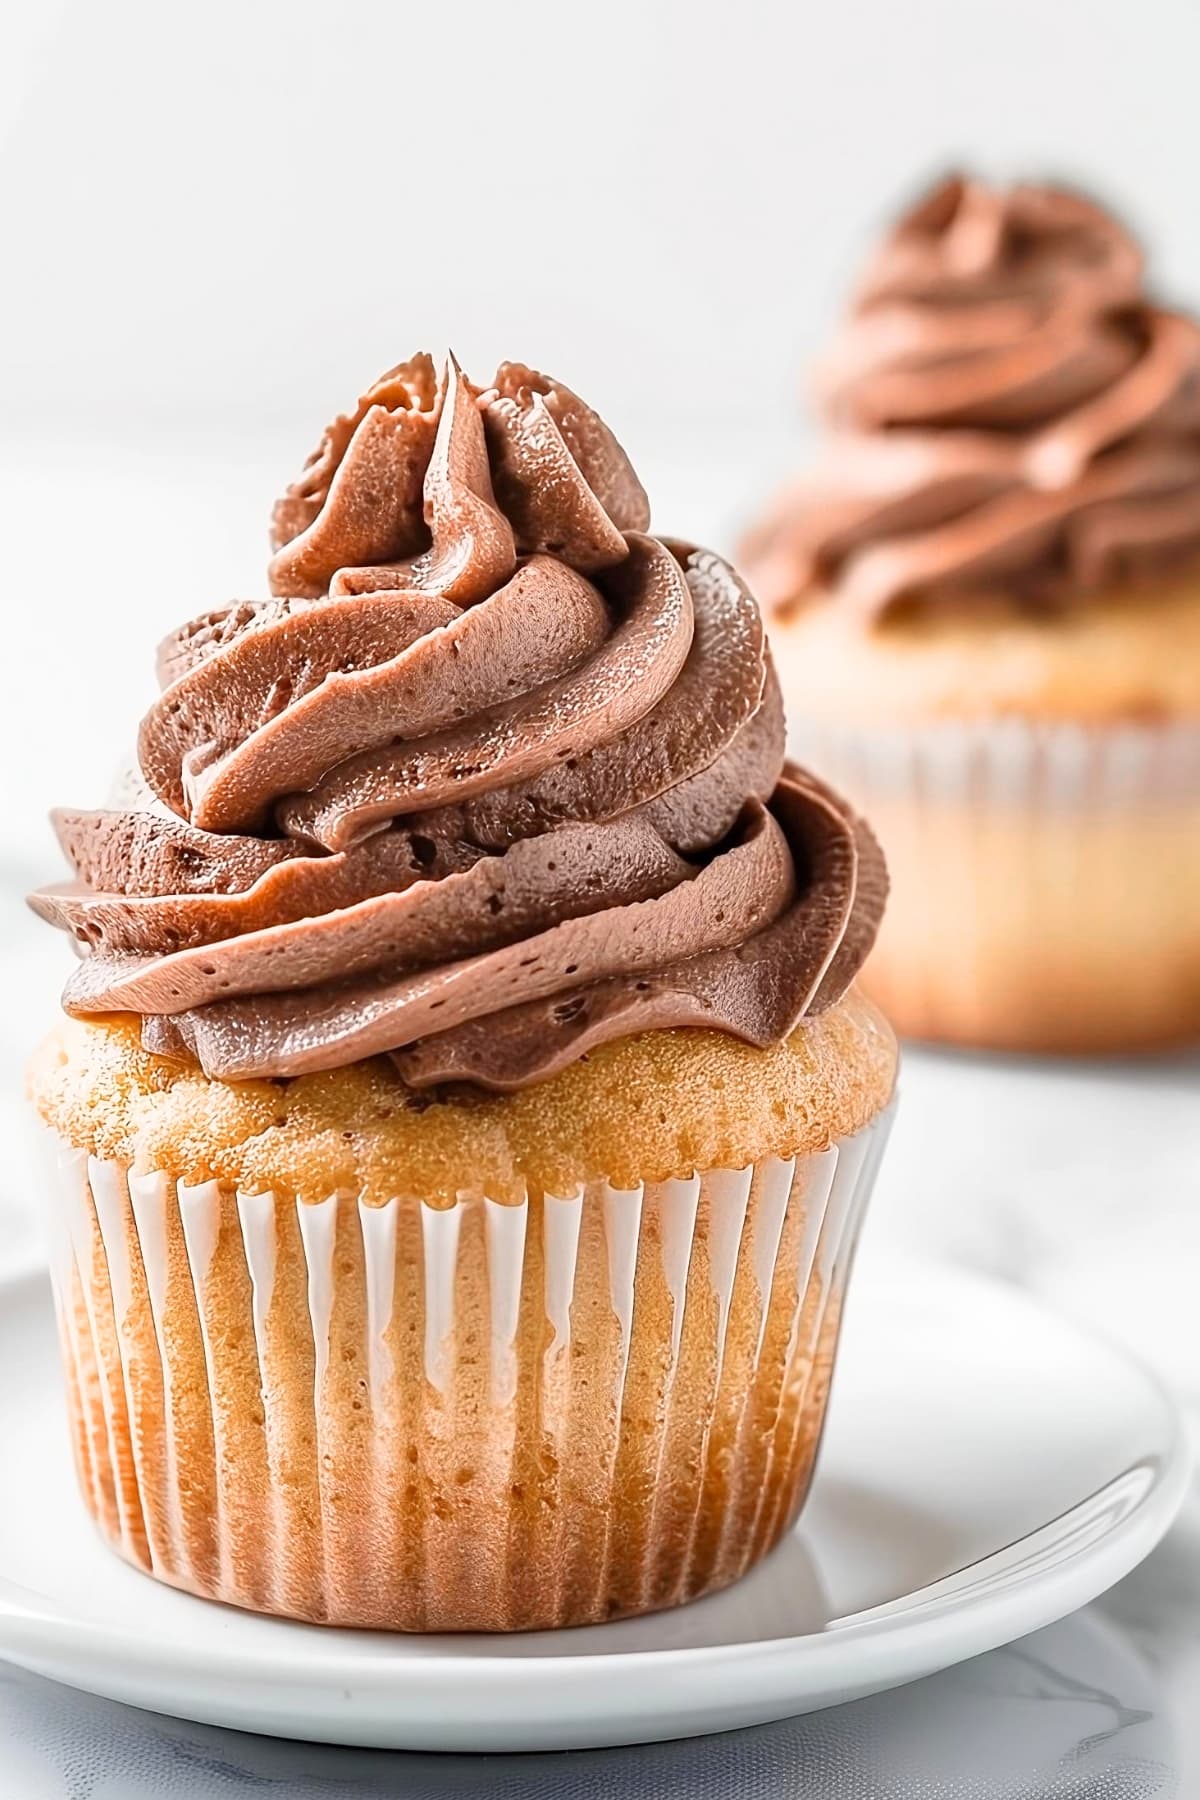 Cupcake topped with chocolate whipped cream.